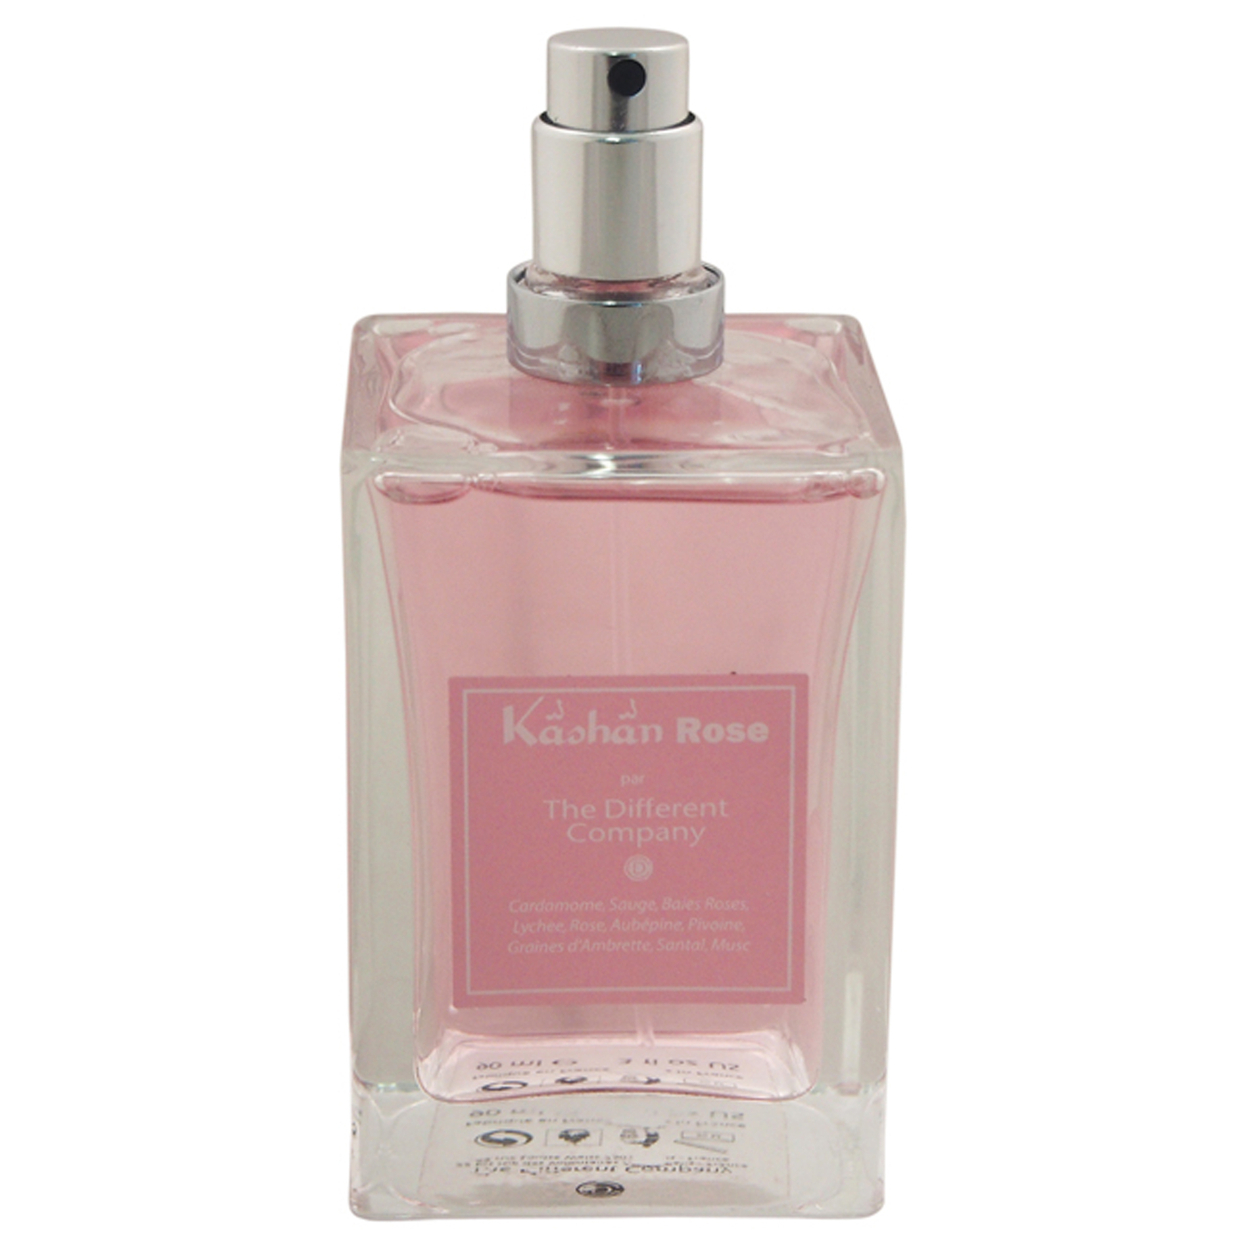 The Different Company Kashan Rose EDT Spray 3 Oz